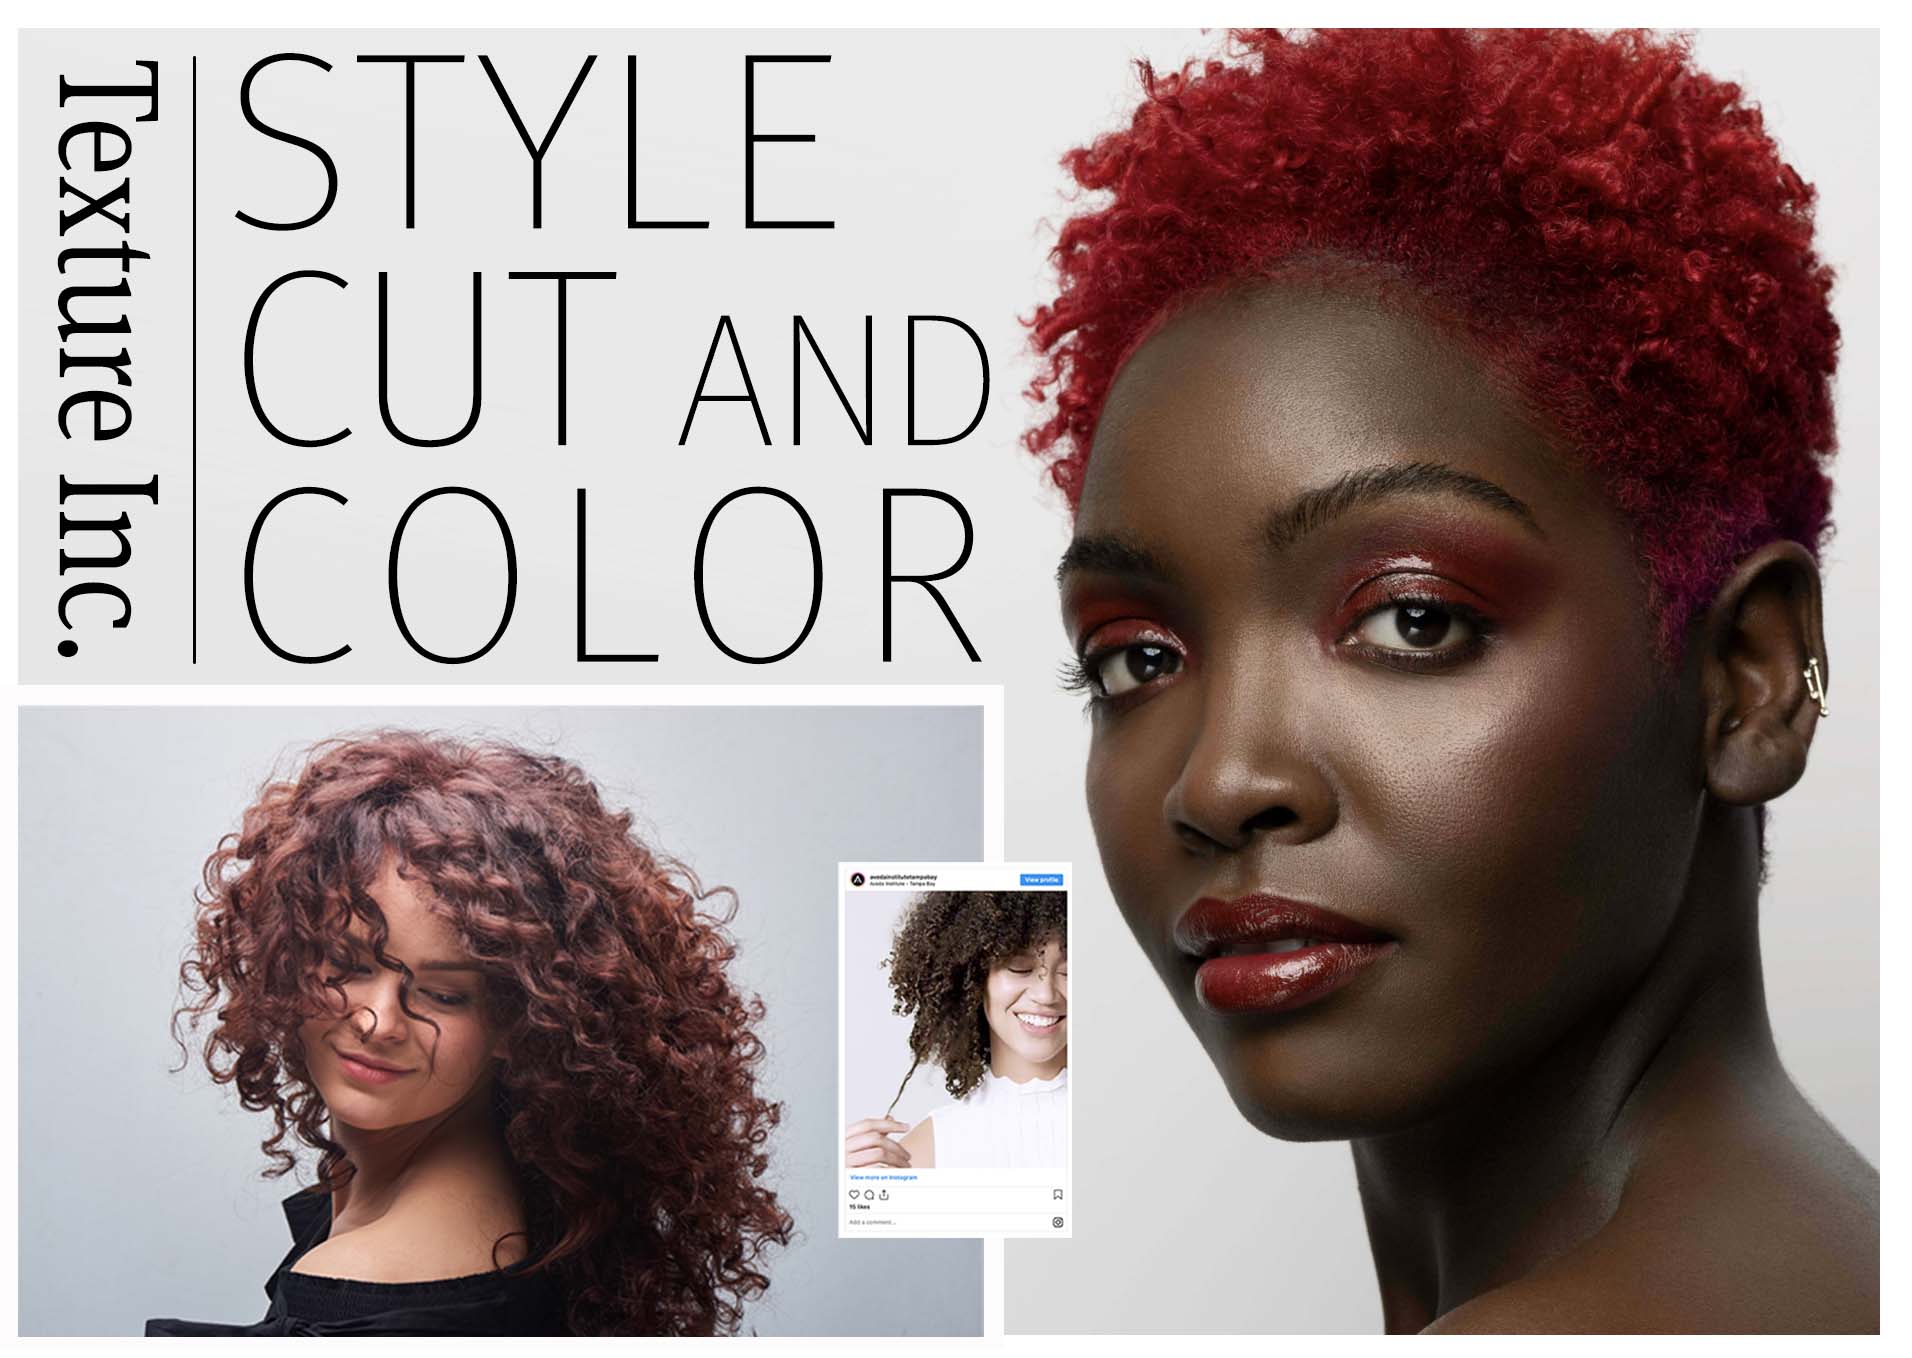 Image of Aveda texturized program with images of curly haired women